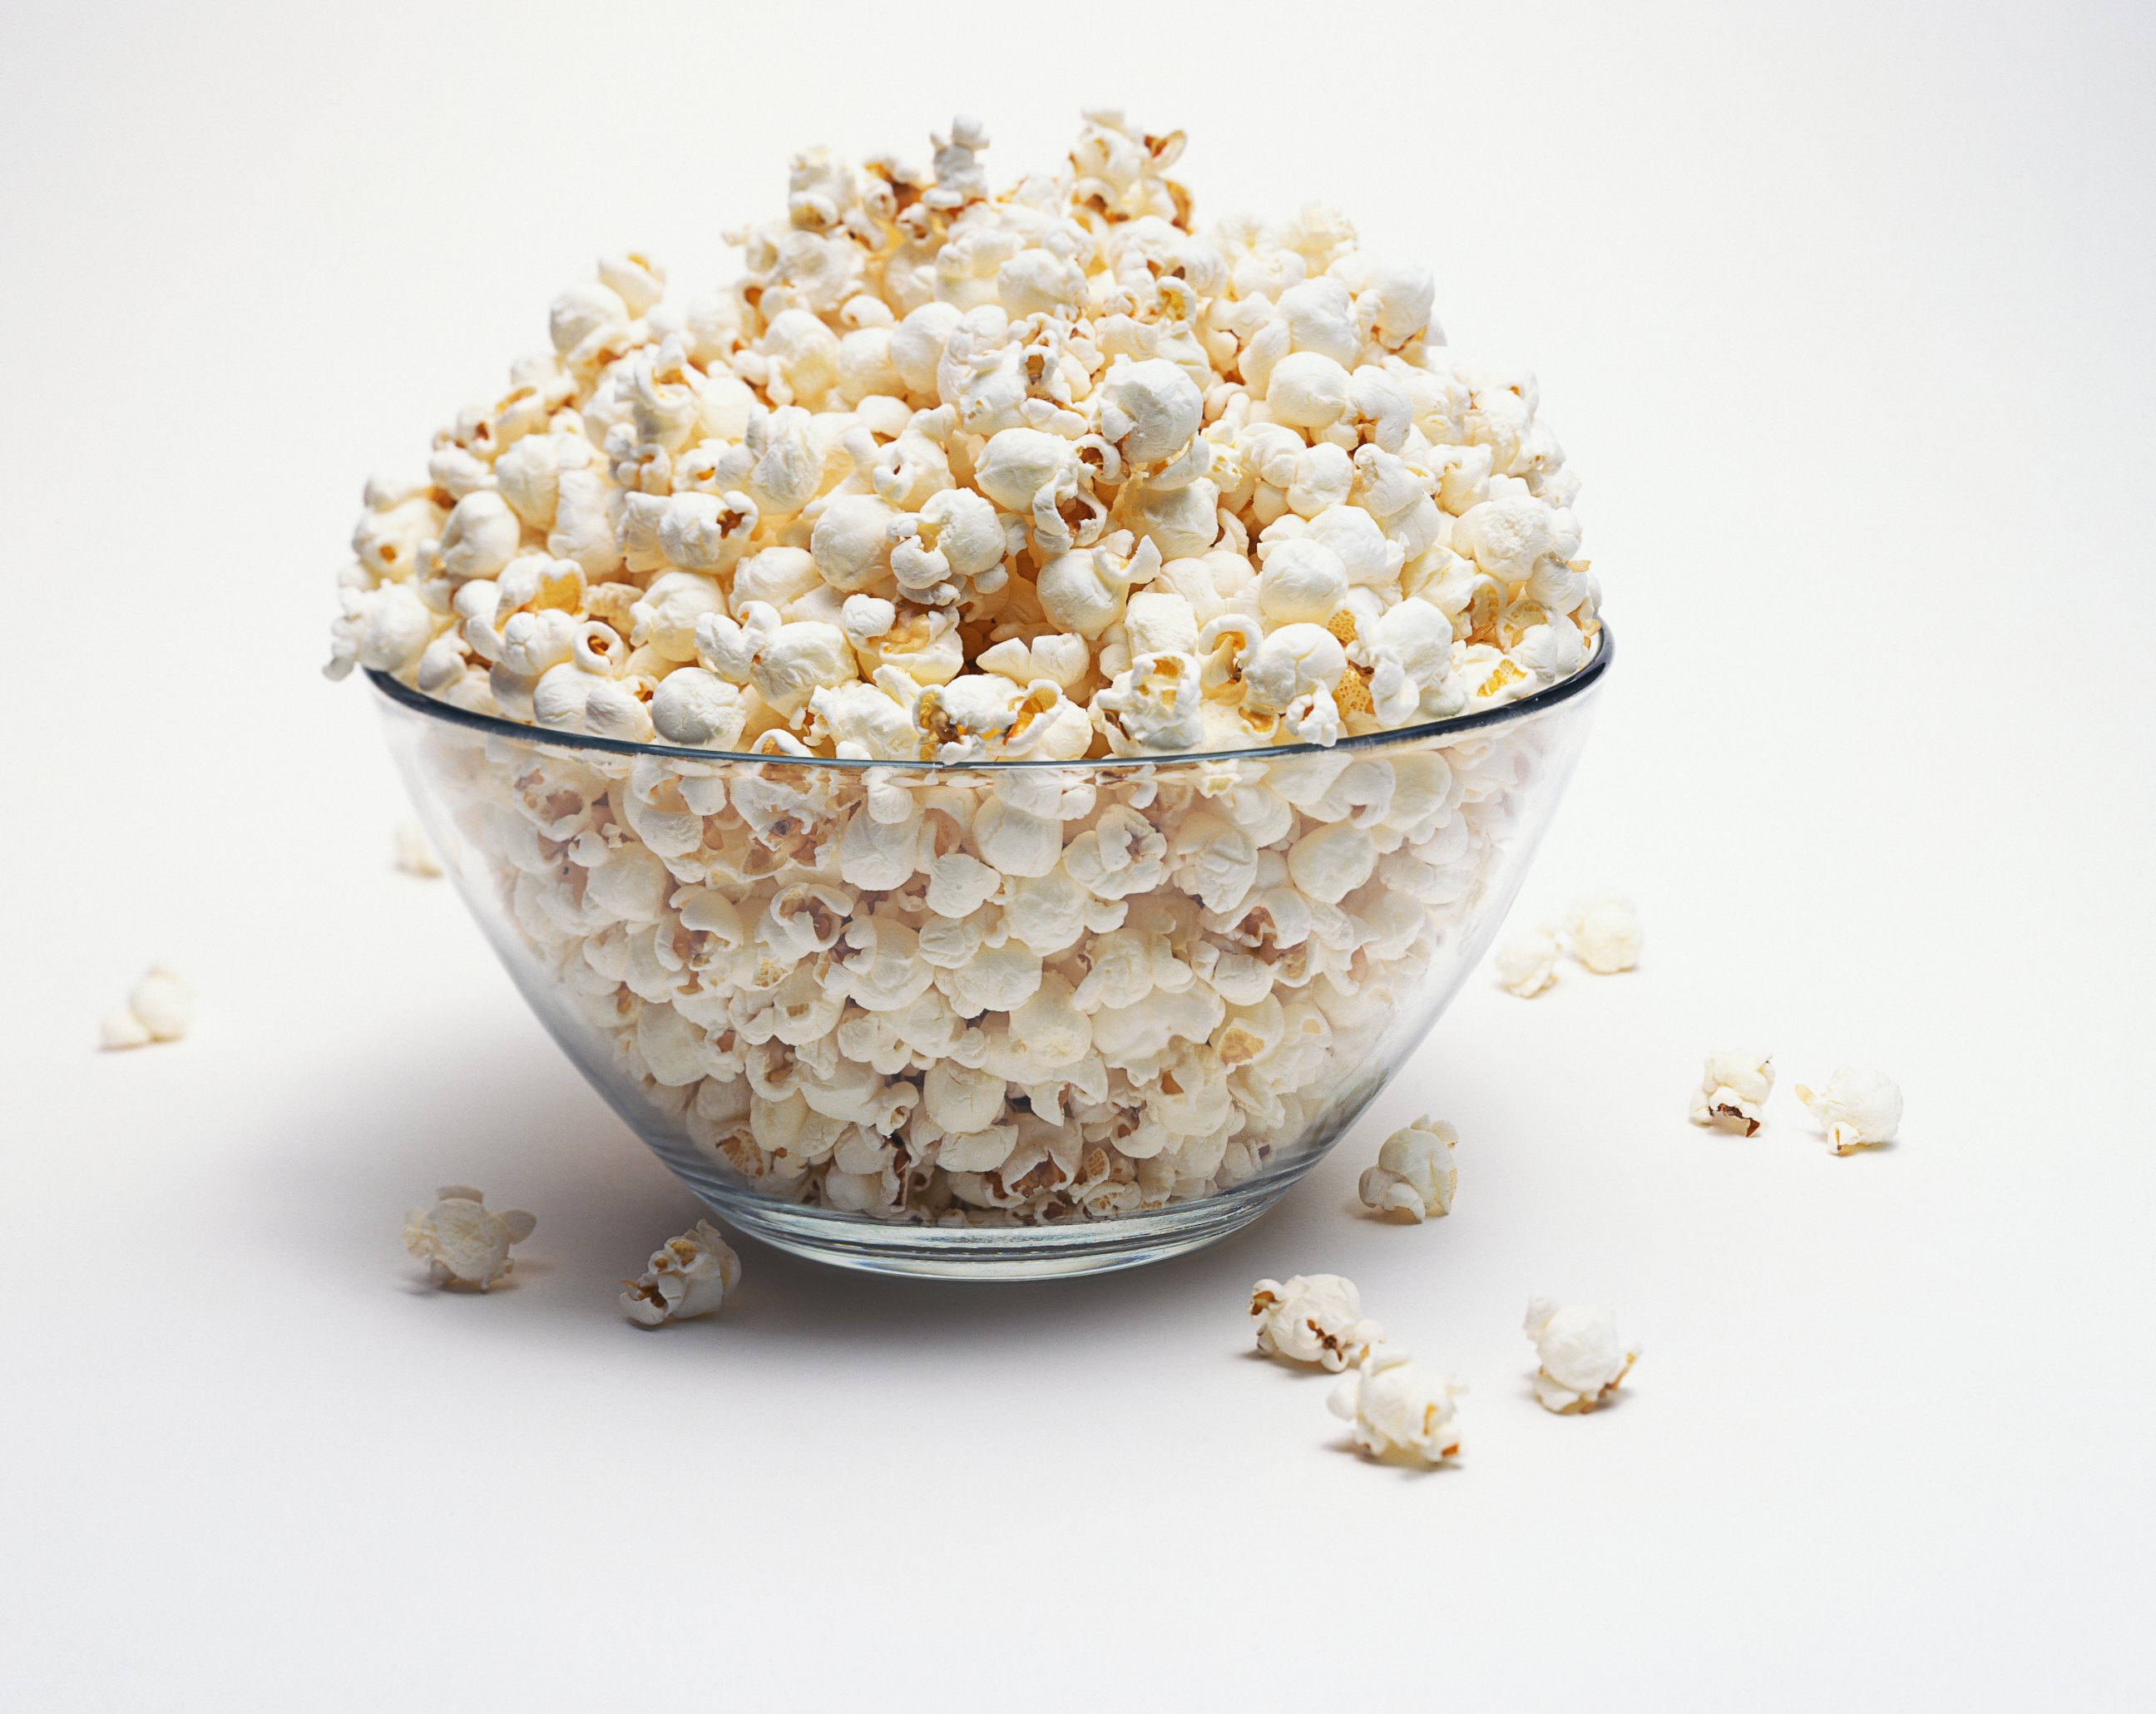 PHOTO: A bowl of popcorn is pictured in this undated stock photo.